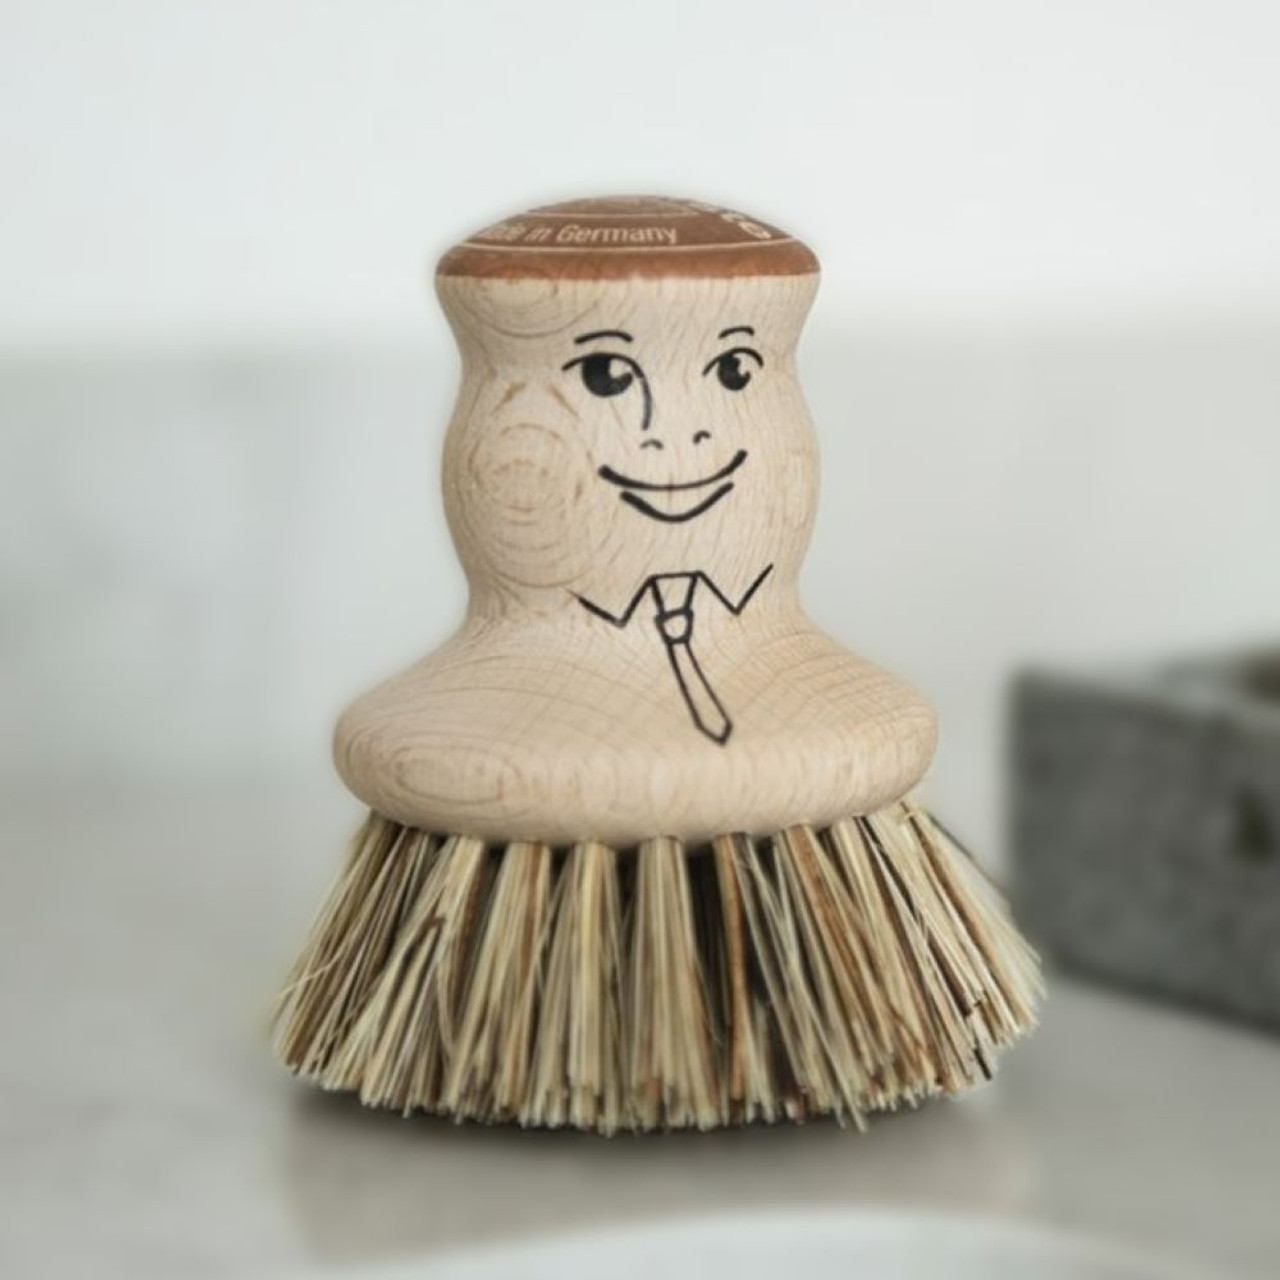 He will make you grin while cleaning the grime! 